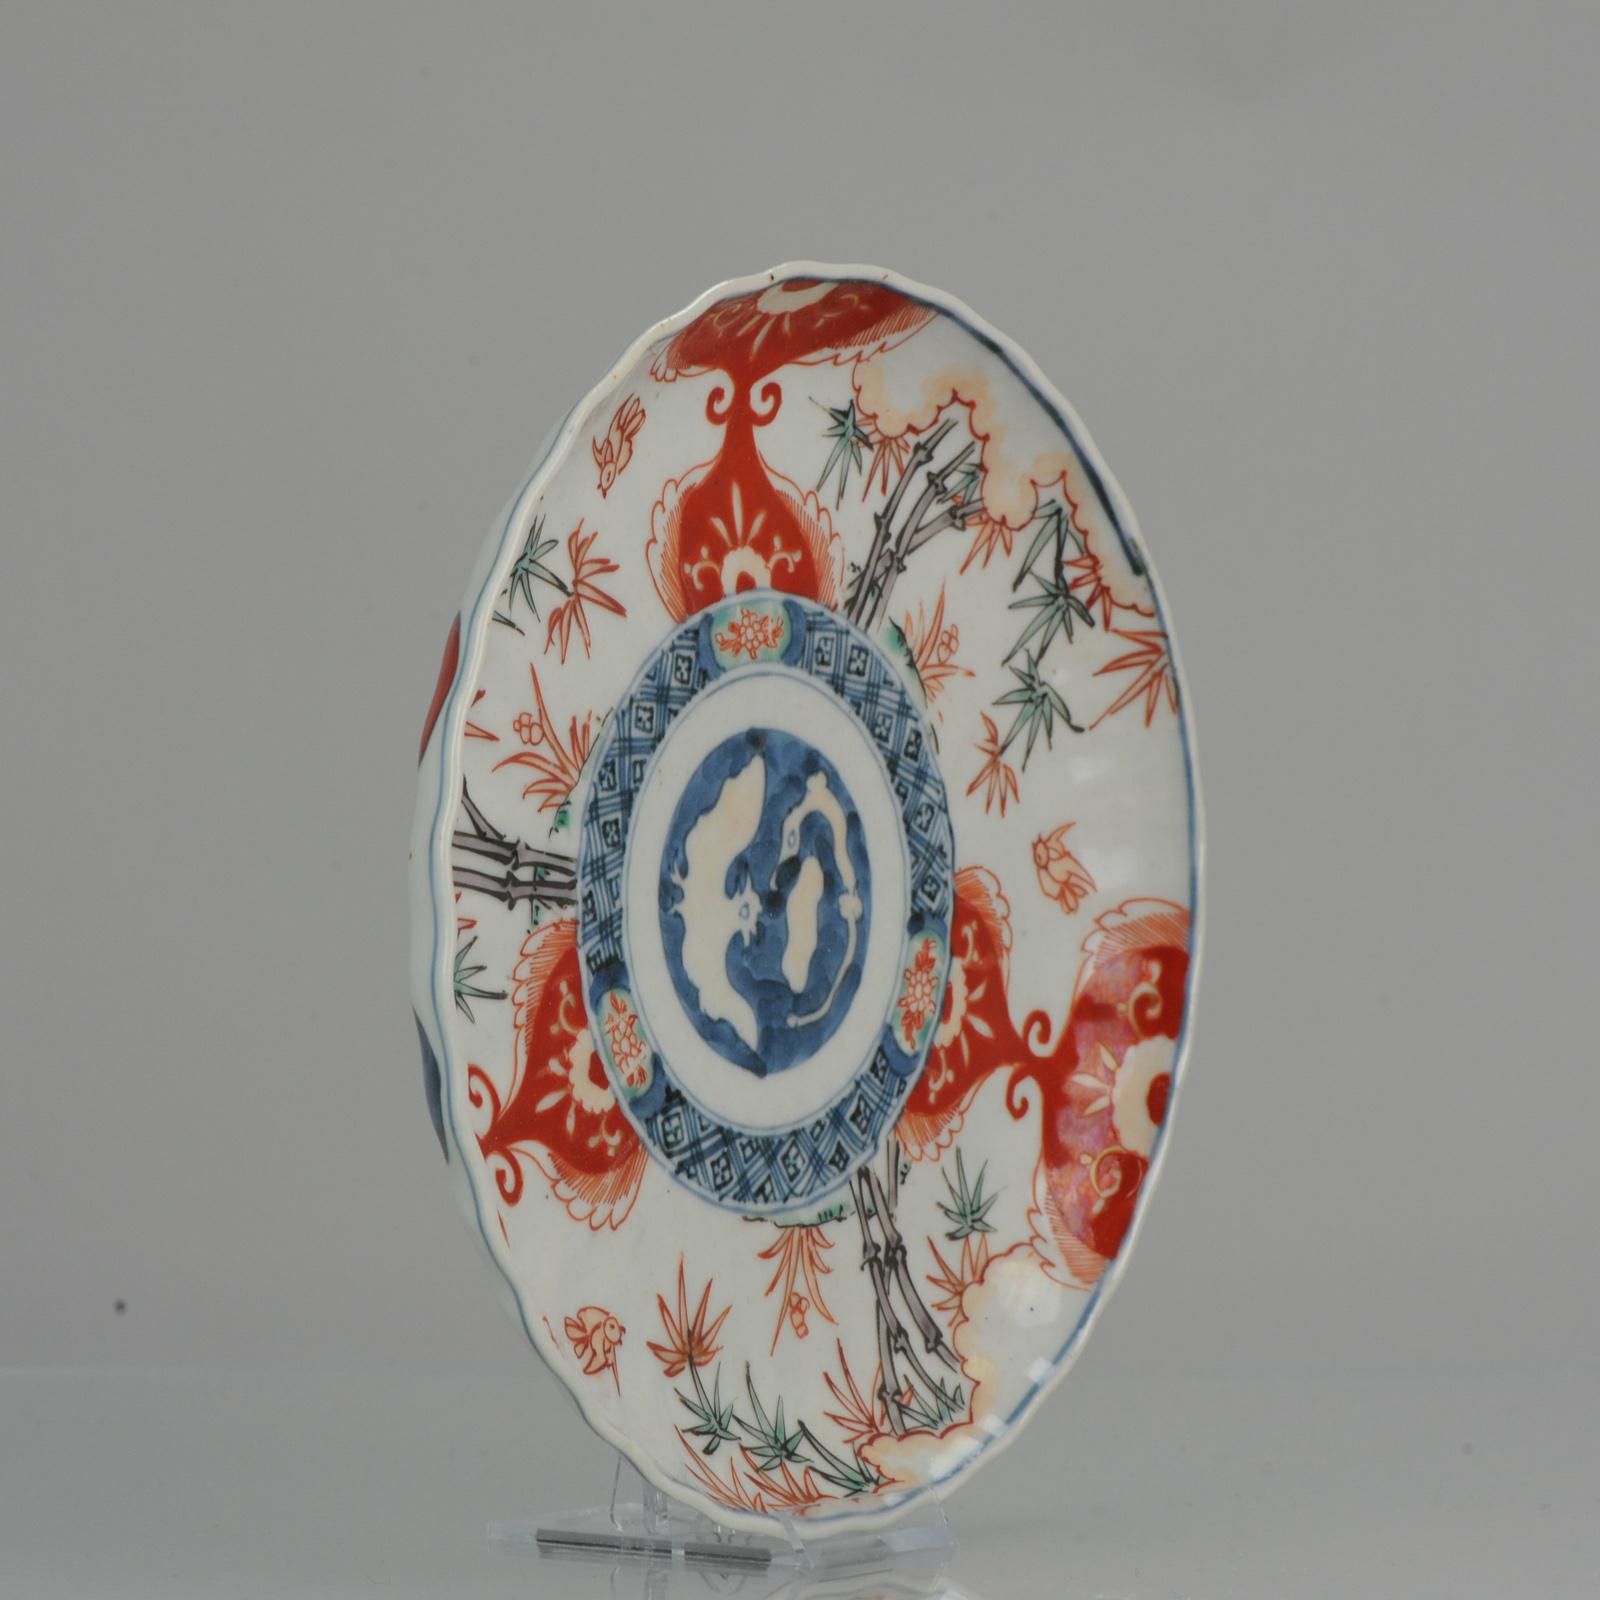 A very nicely made dish with a beautiful decoration. Central scene in underglaze blue with a bird/rooster and a dragon. Border overglaze with bamboo and birds.

Additional information:
Material: Porcelain & Pottery
Type: Chargers (Large